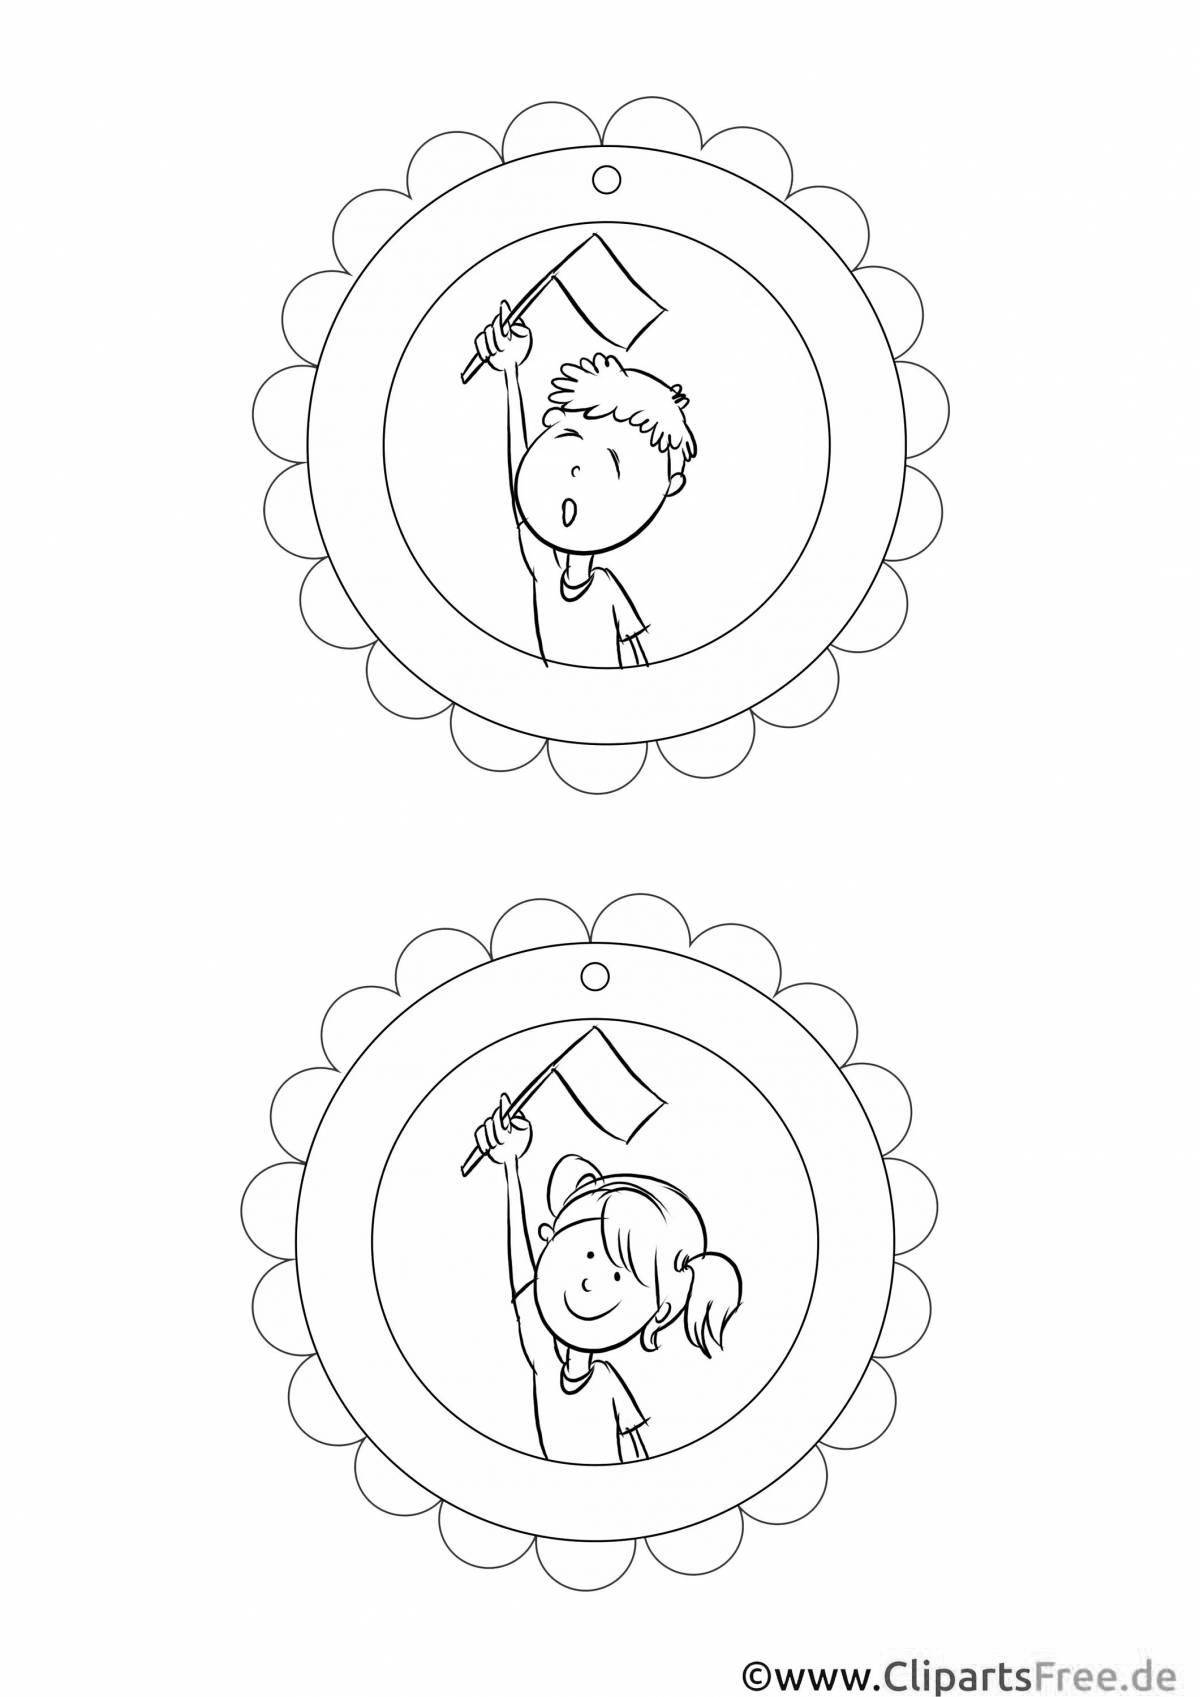 Exquisite medal coloring page